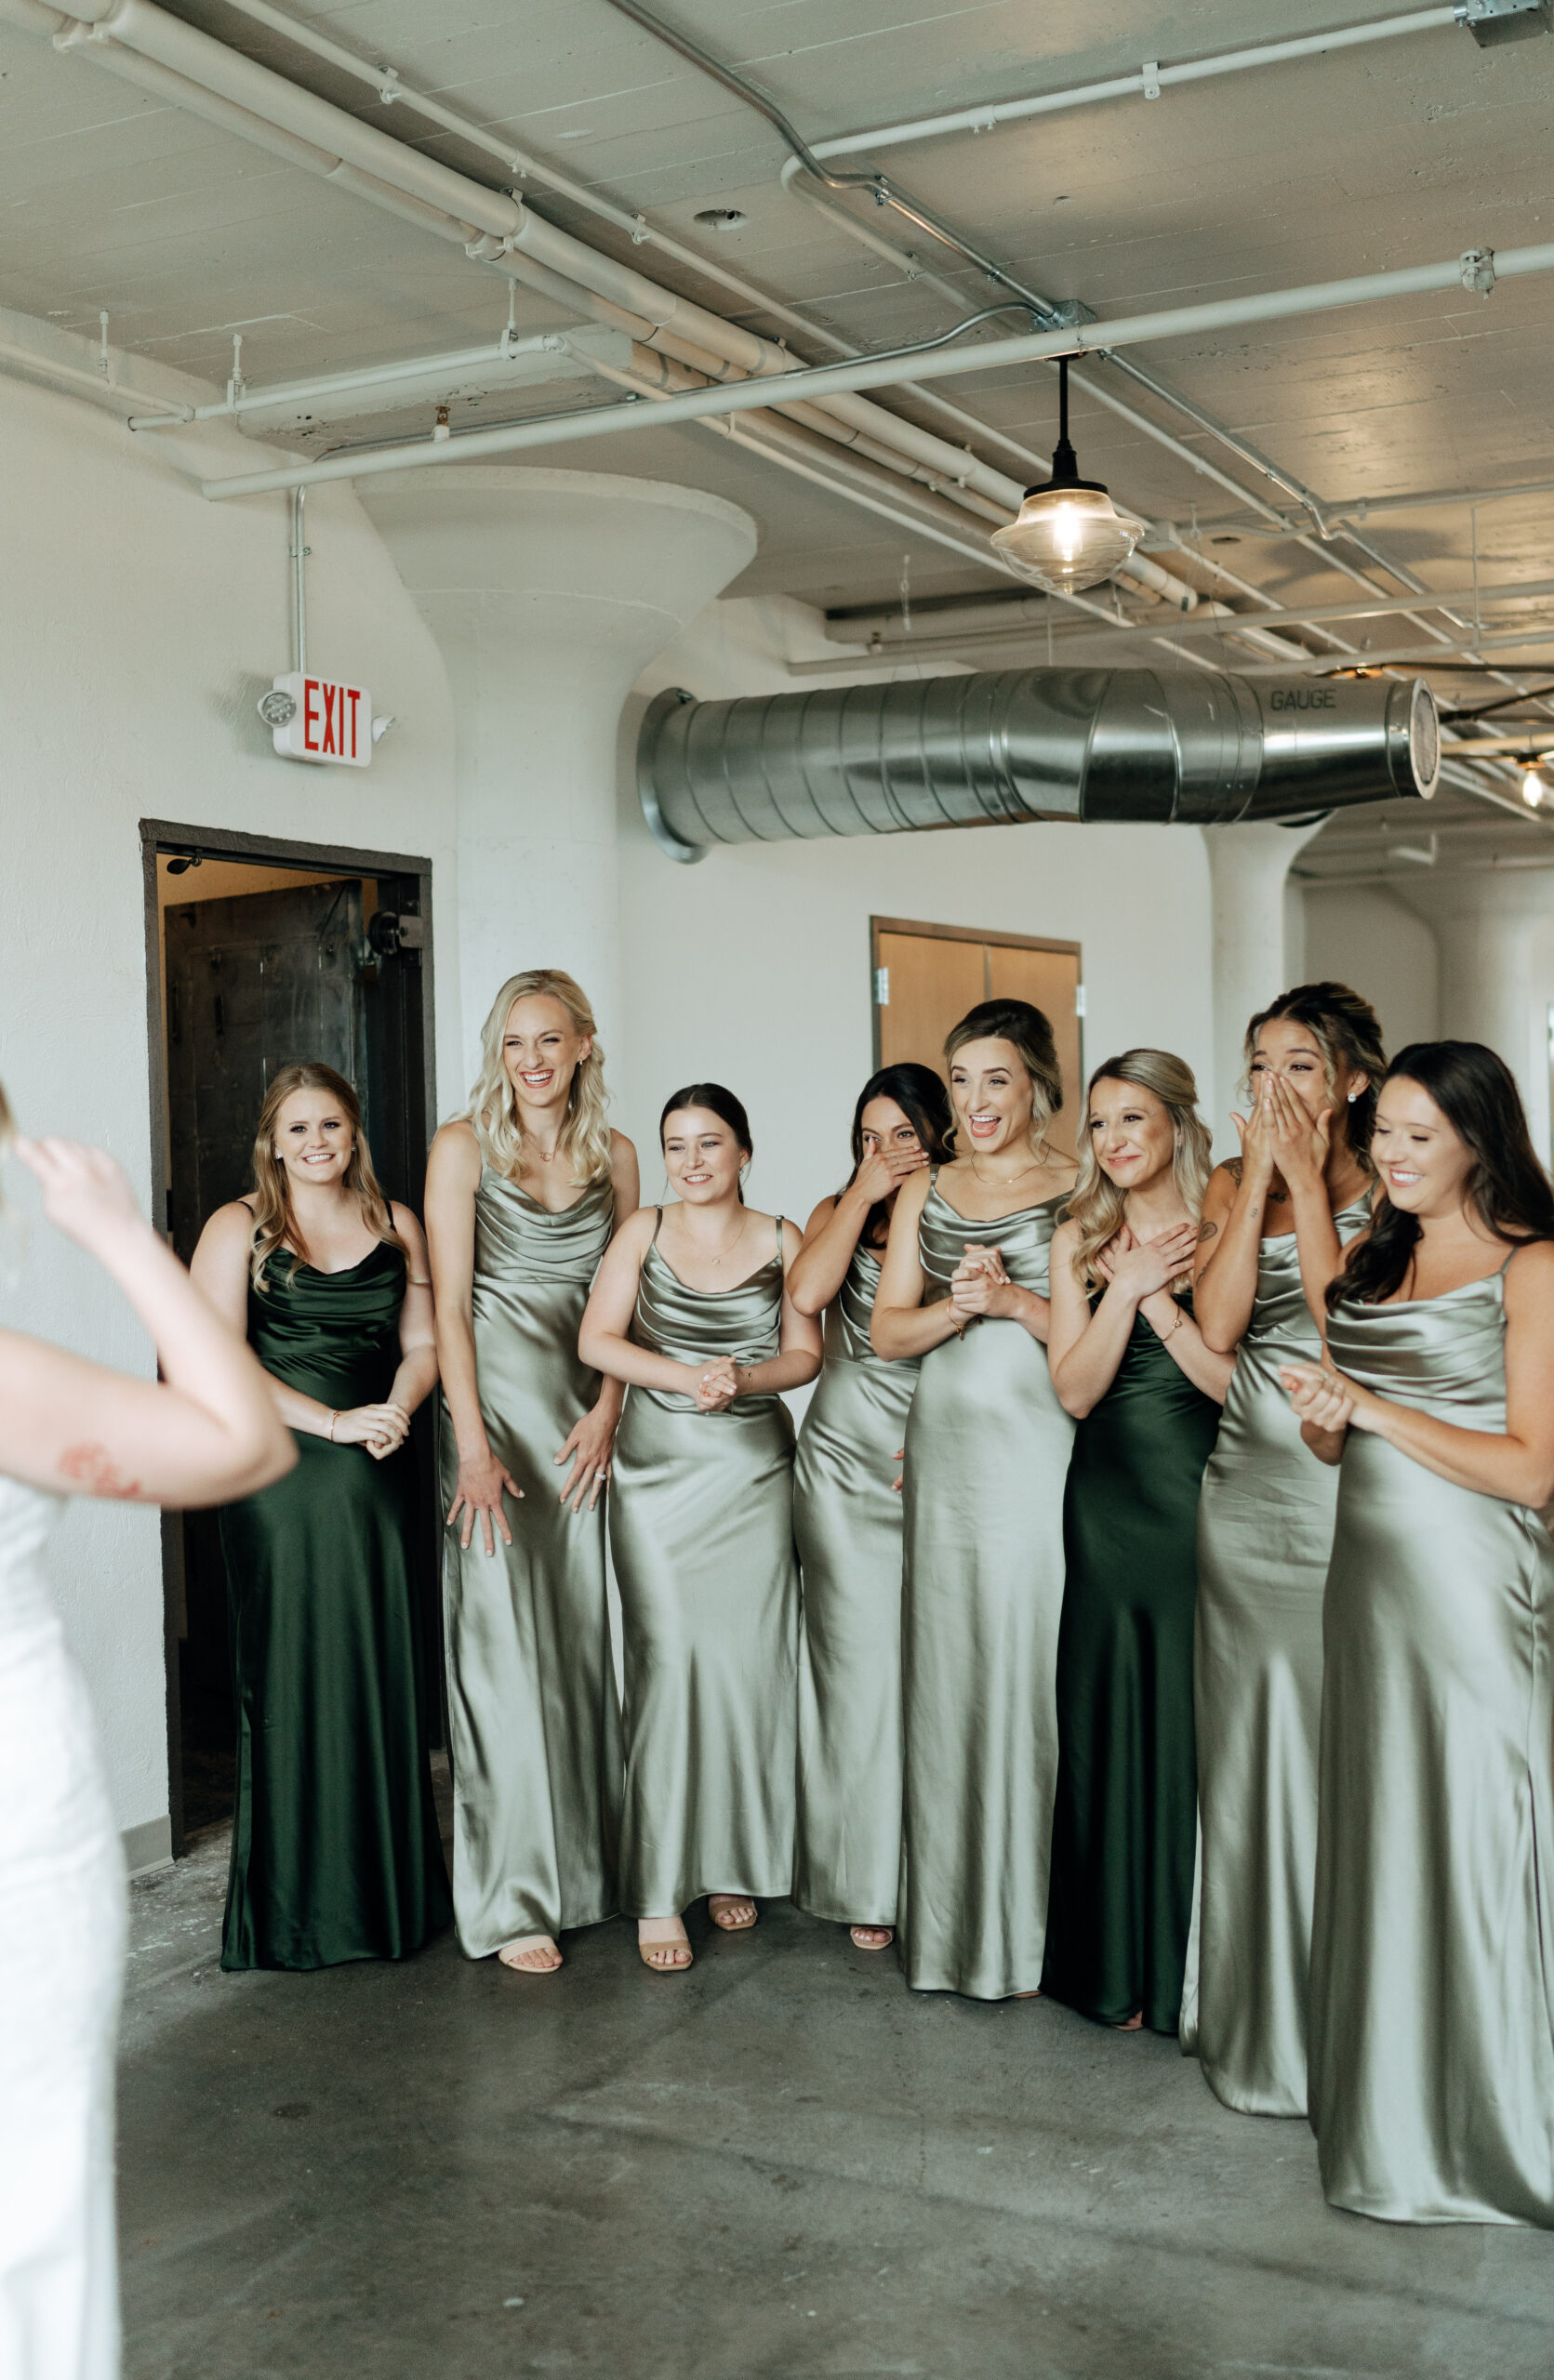 This is a picture of bridesmaids seeing the bride for the first time on her wedding day